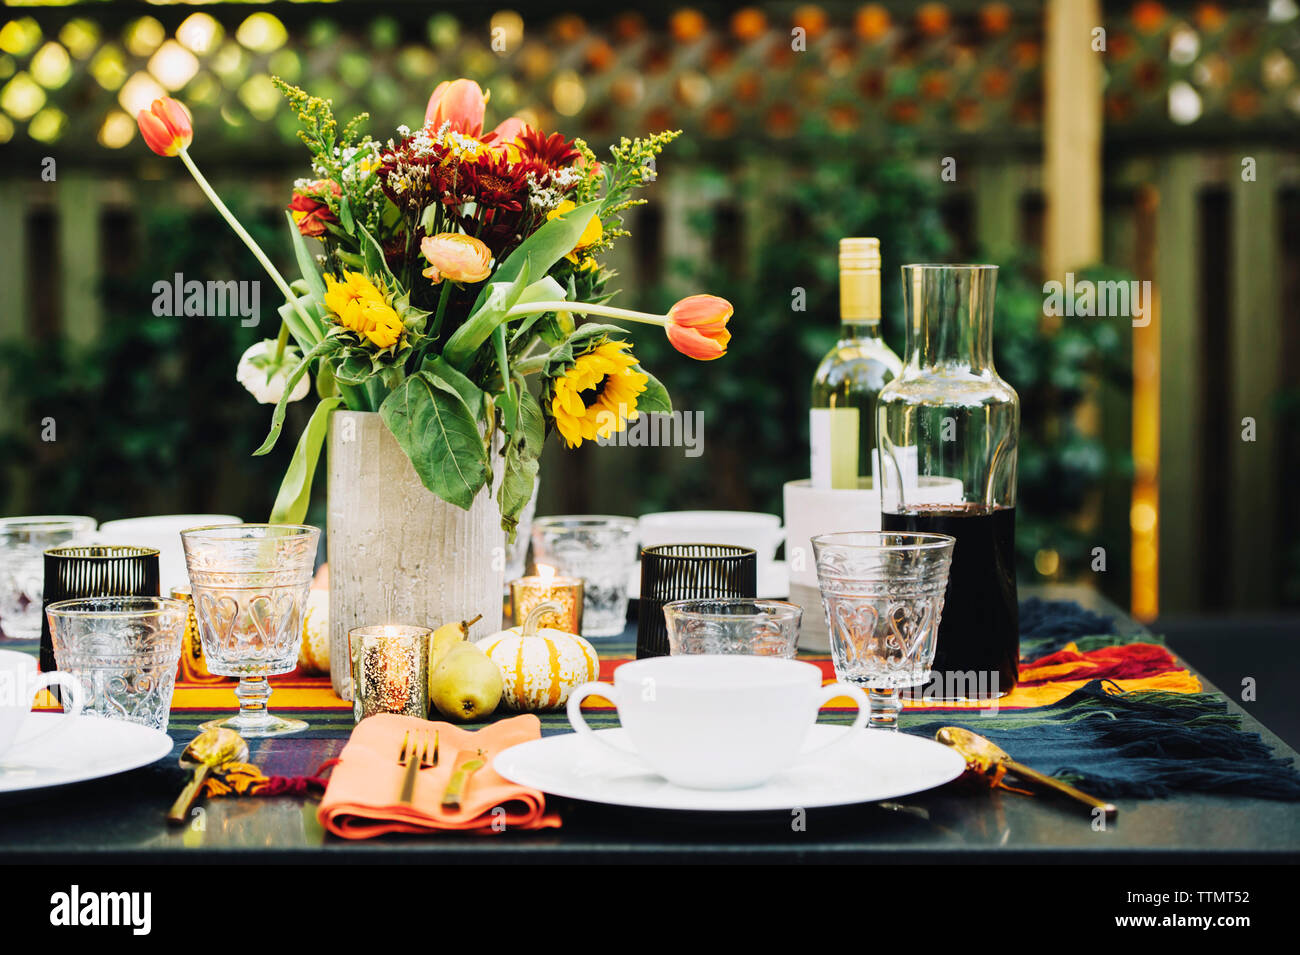 Flower vase with place setting and wine bottles on dining table in backyard Stock Photo